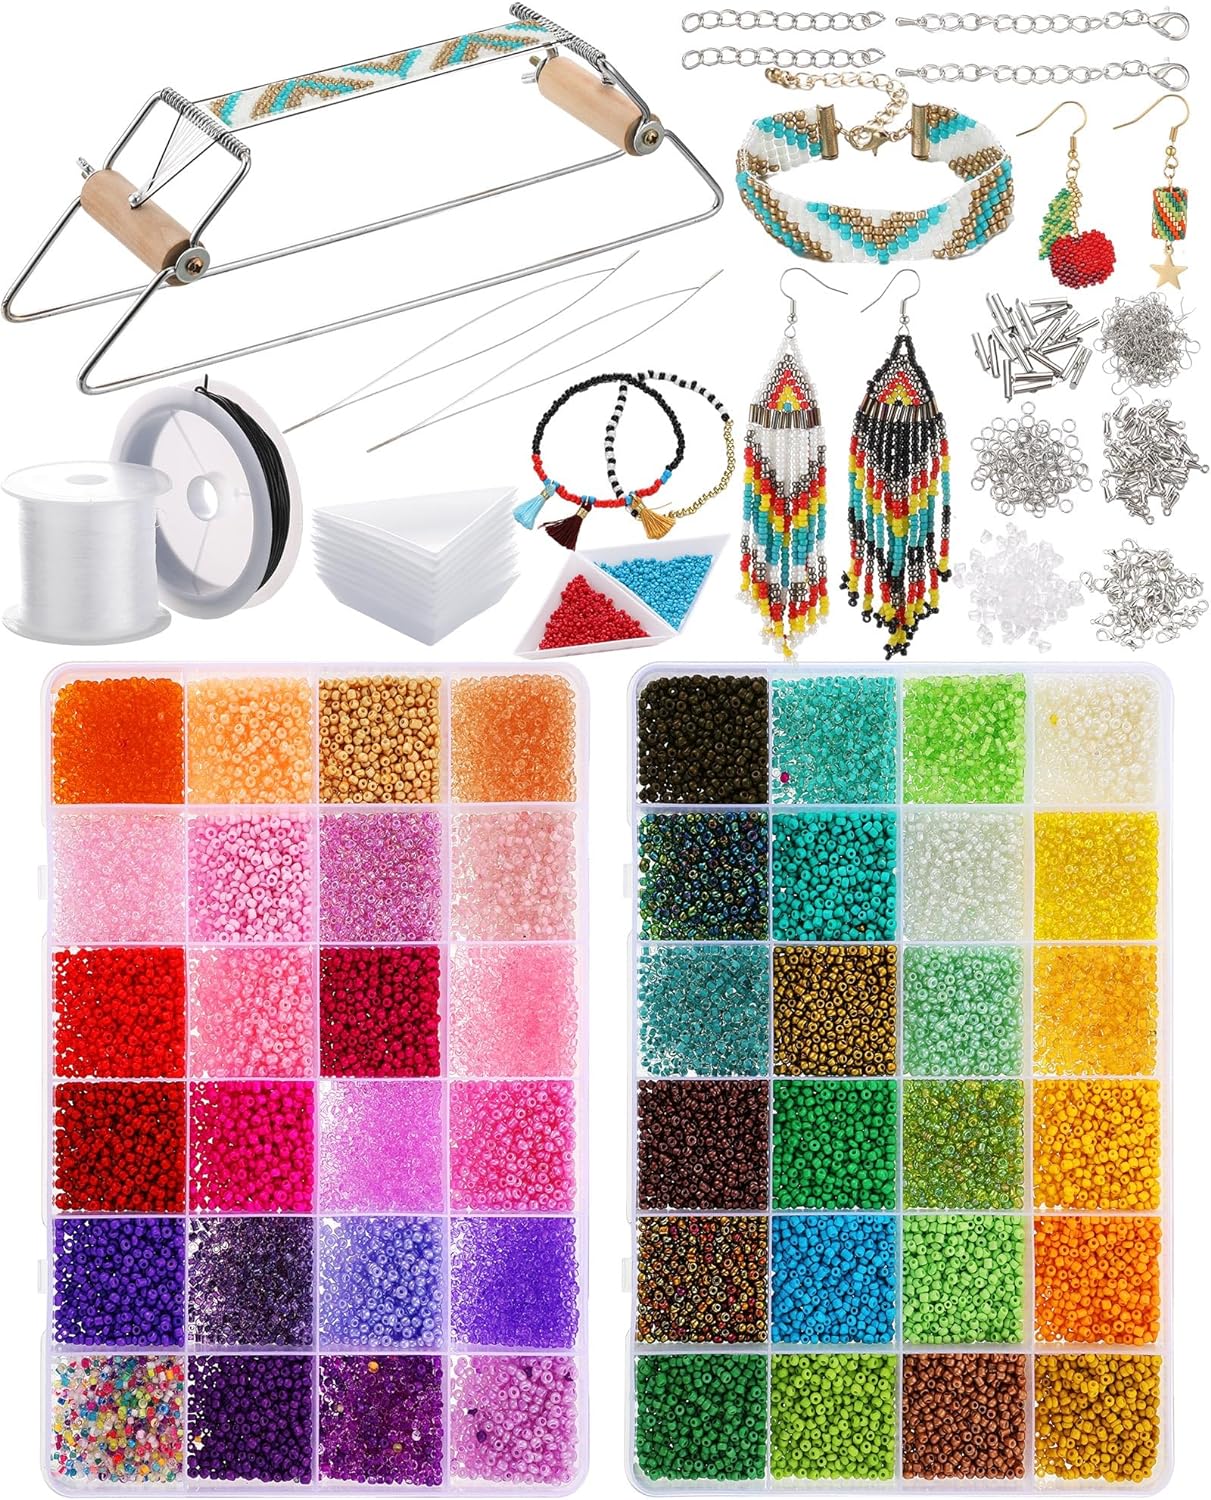 Bead Loom Kit for Adults Beading Loom Supplies 24000 Pcs Glass Seed Beads Bracelets Jewelry Earring Making Tools Gifts for Girls DIY Craft